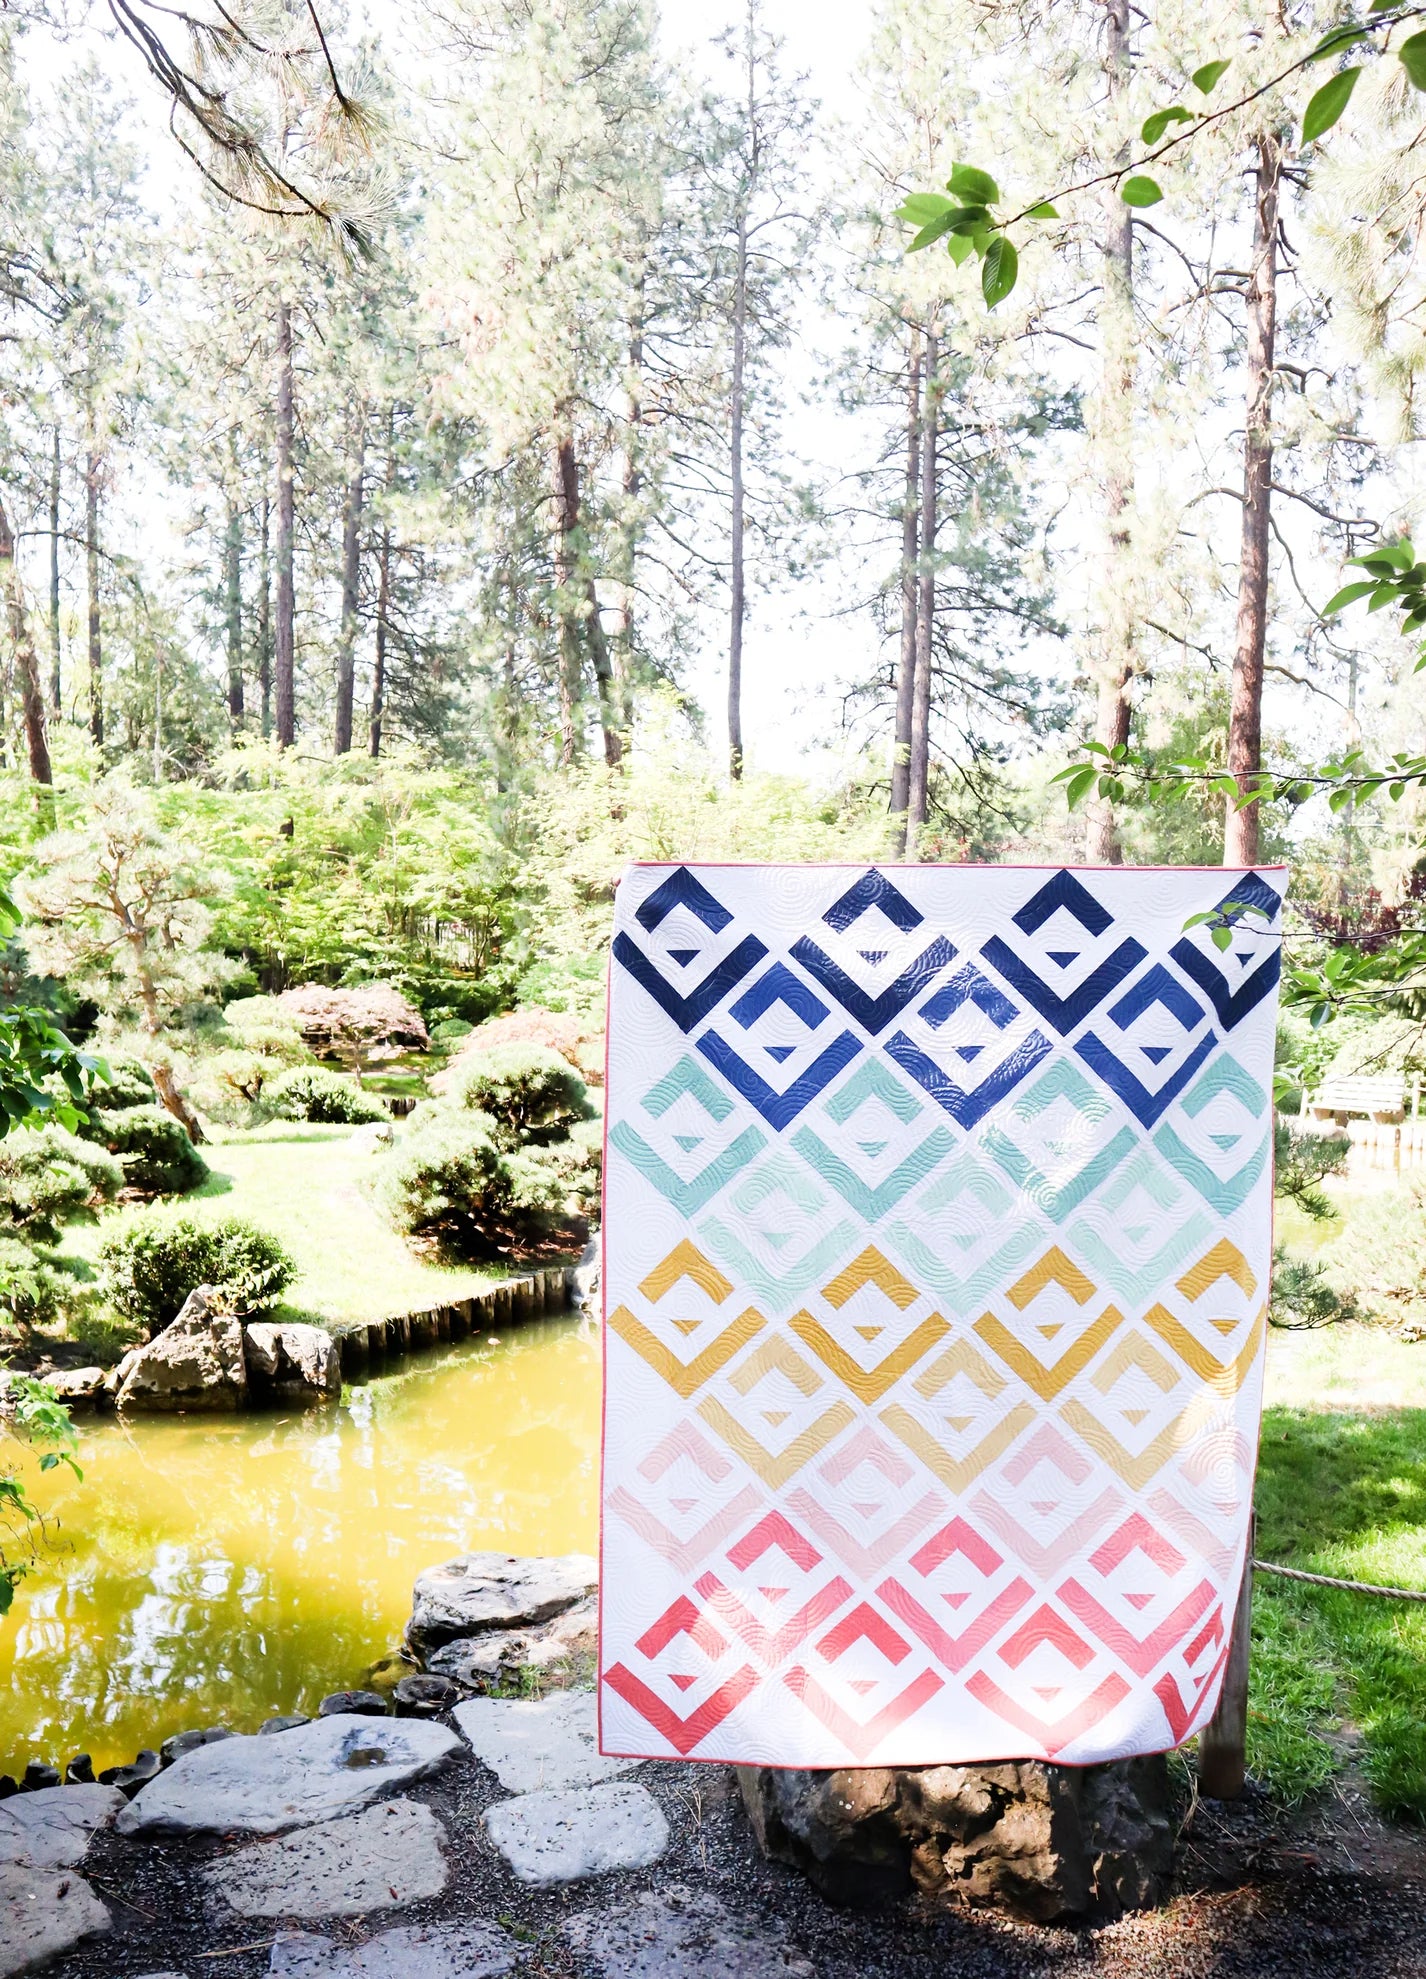 Cotton and Joy -  Cabin Valley Quilt Pattern